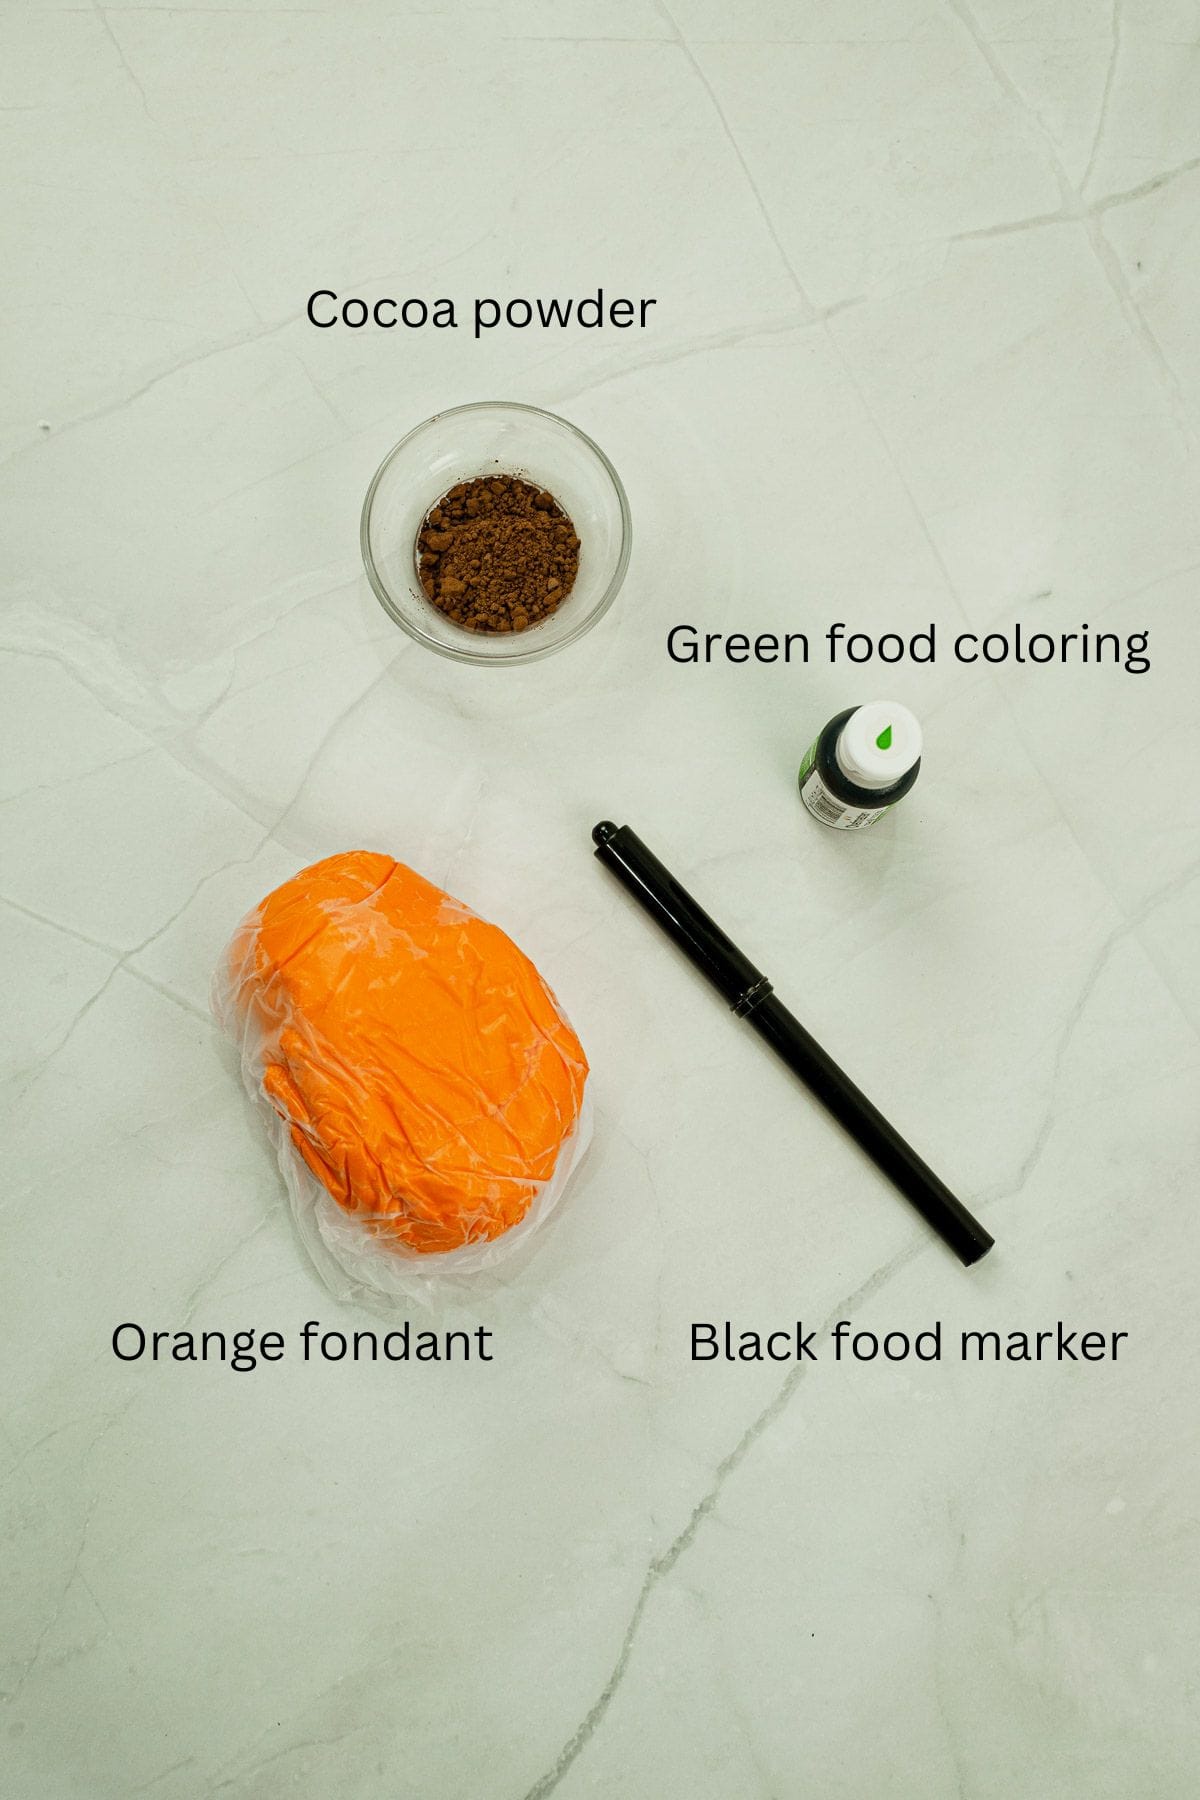 Cocoa powder, black food marker, green food coloring and orange fondant against a marble background.